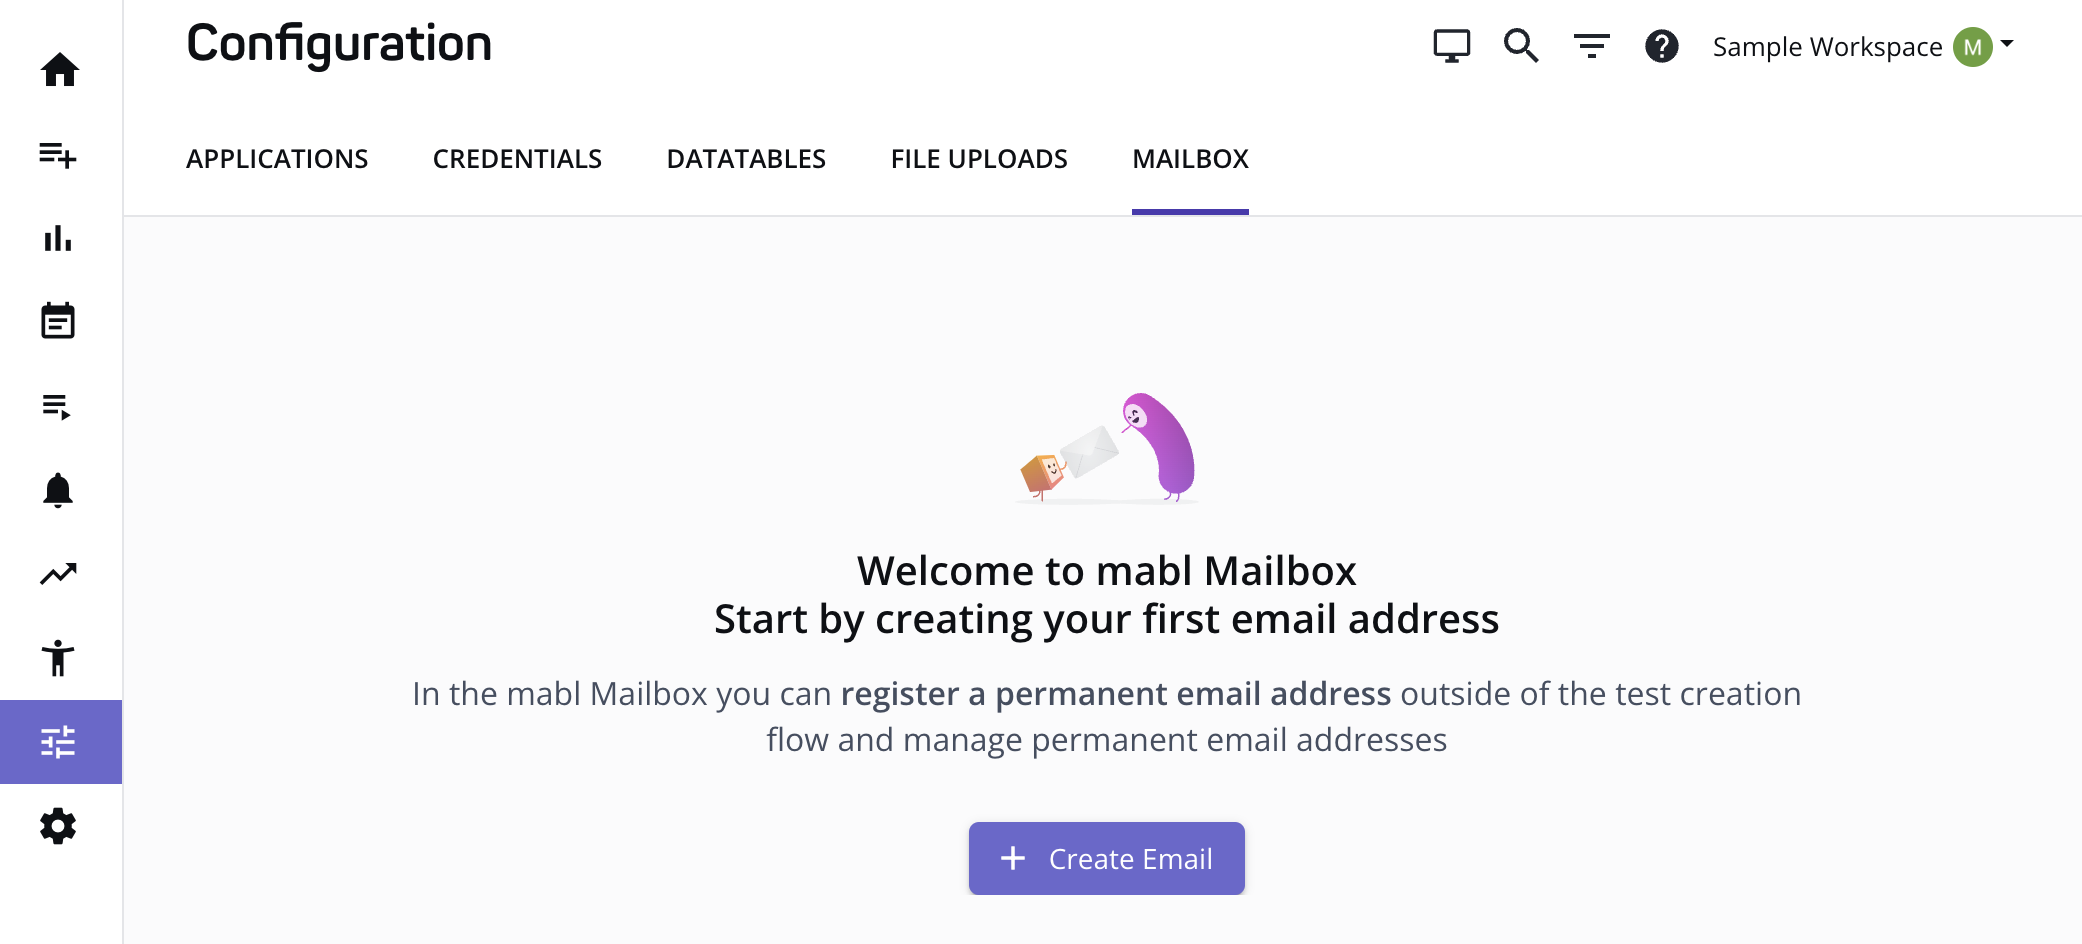 mailbox-page.png